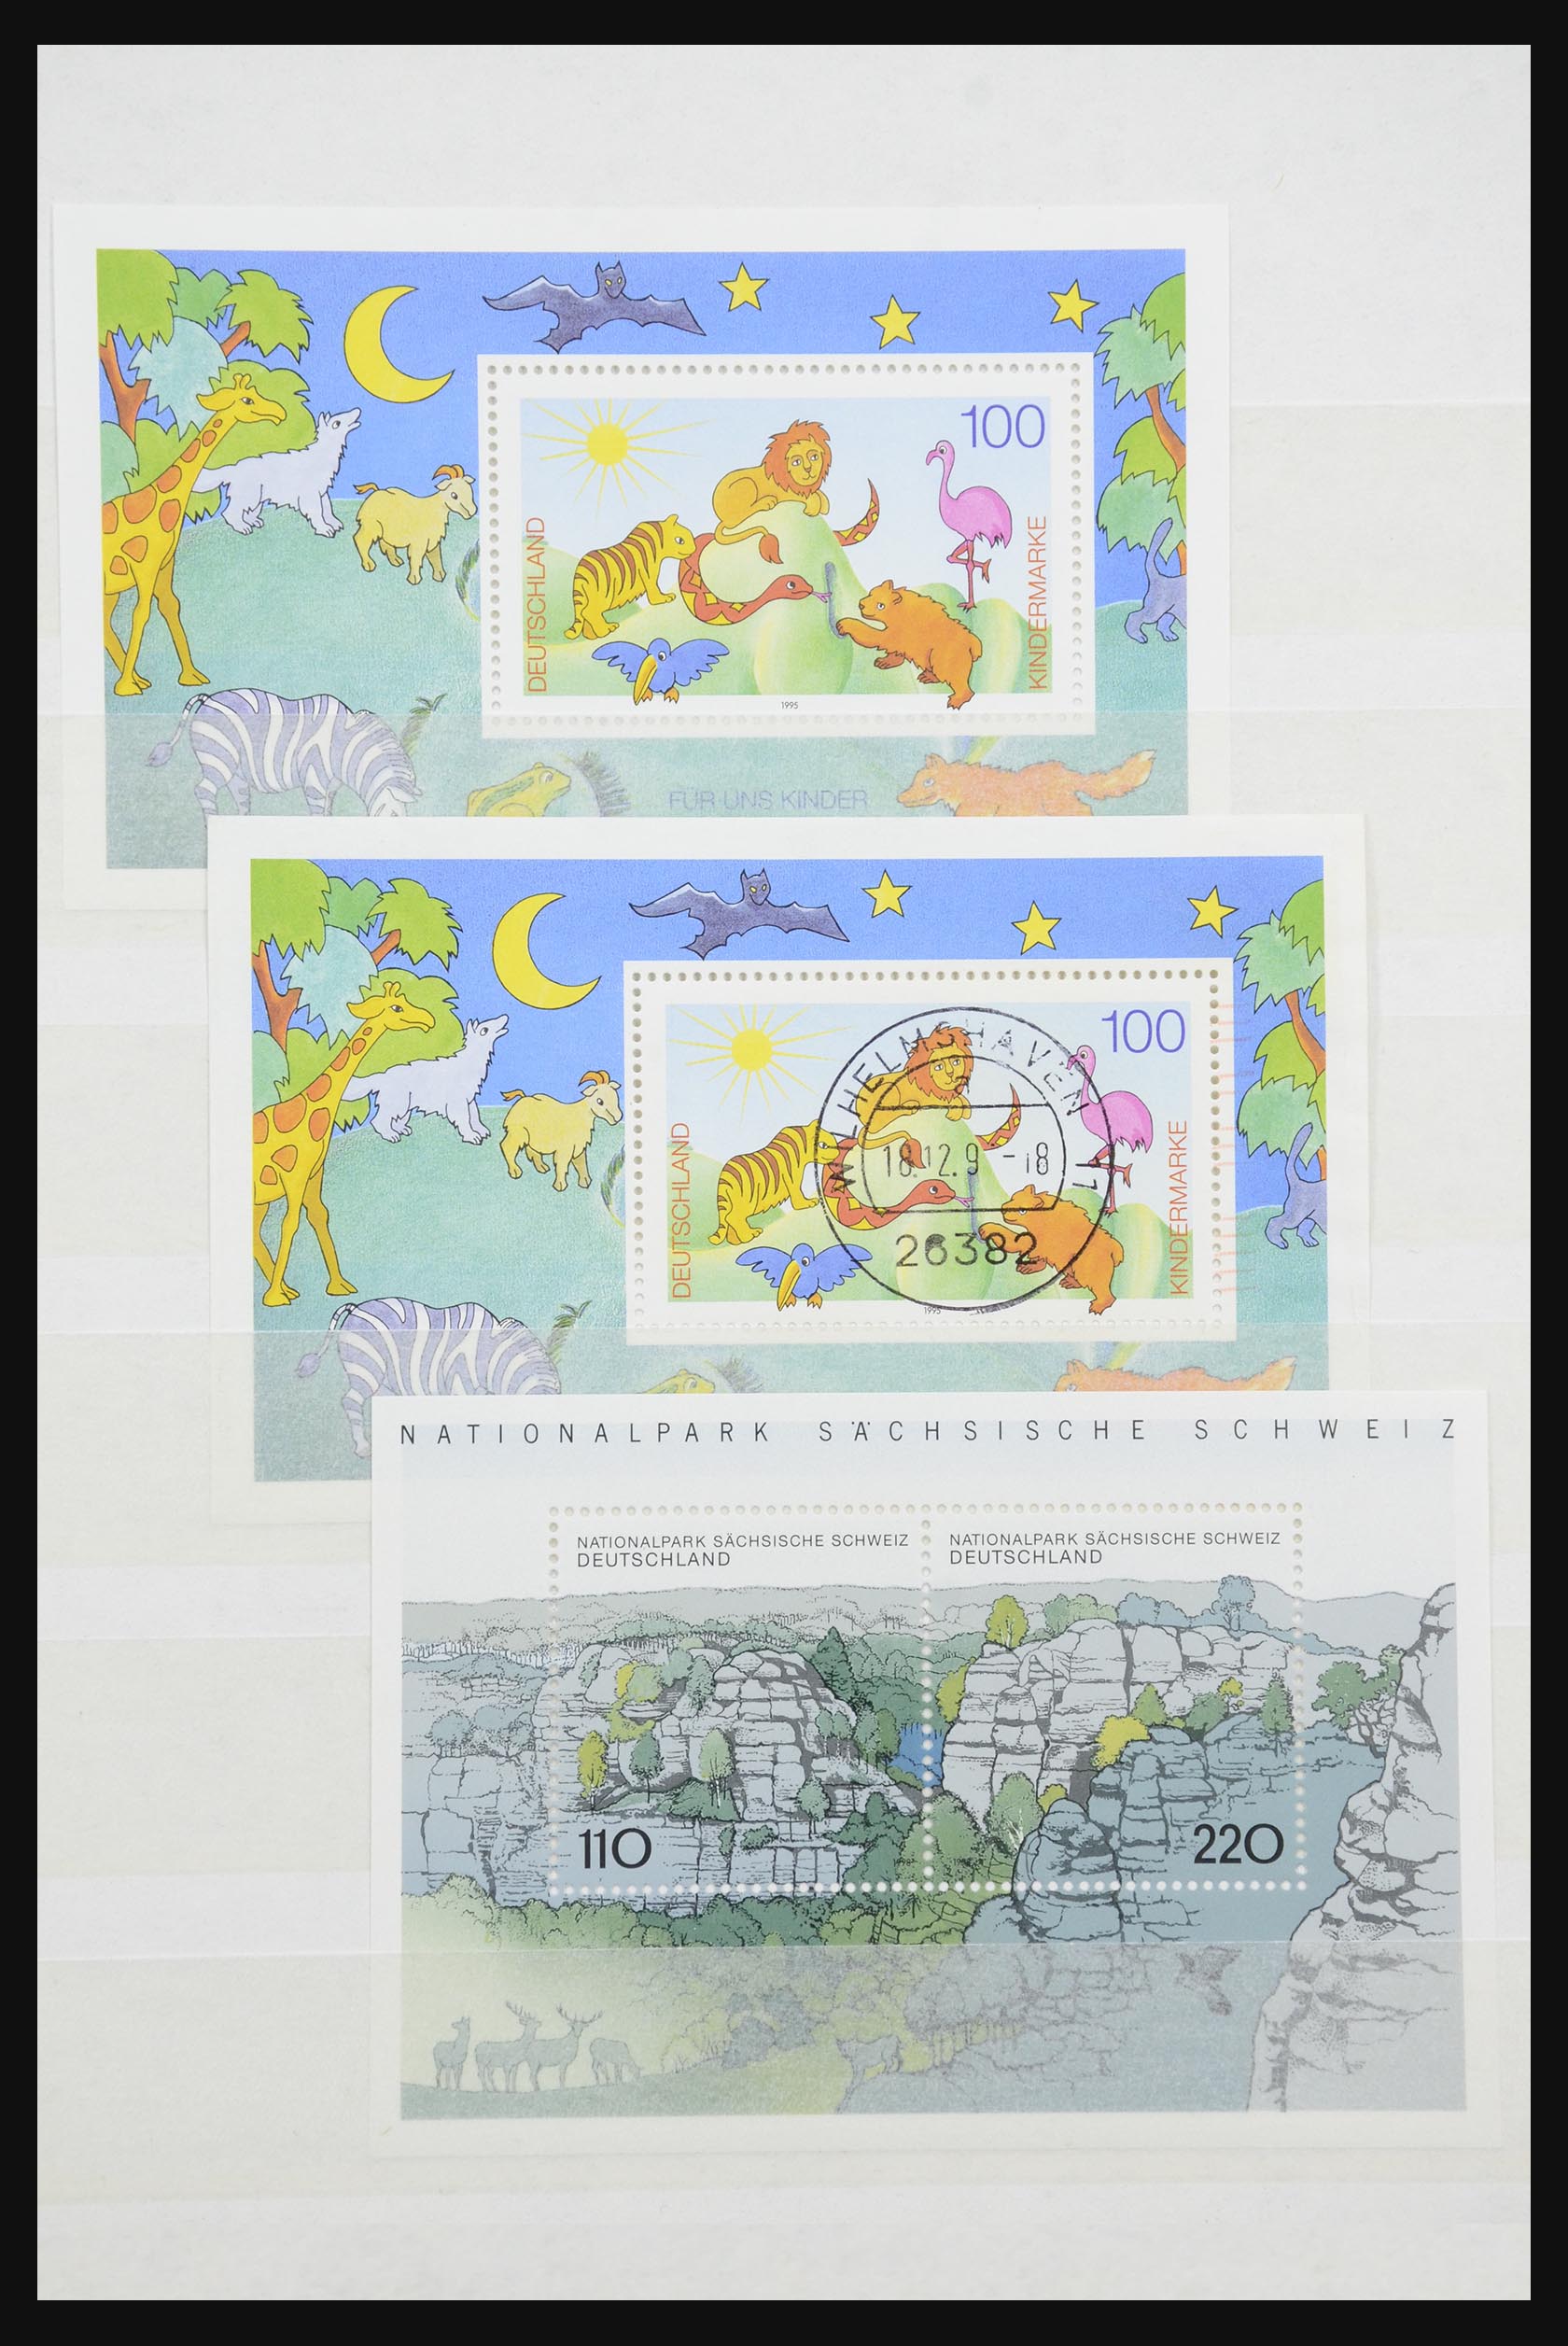 32050 048 - 32050 Bundespost special sheets 1980-2010.